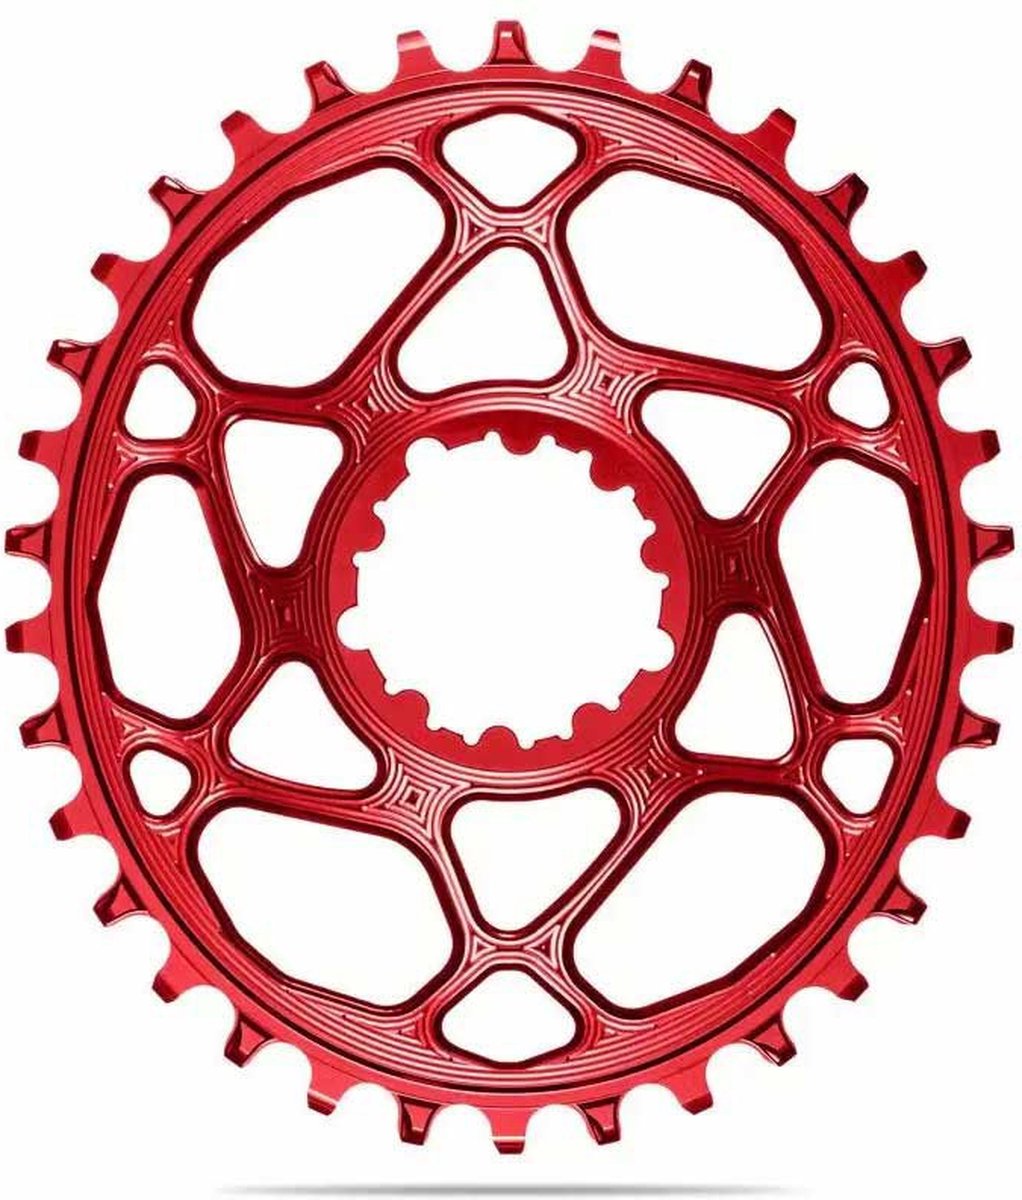 ABSOLUTE BLACK Oval Sram Direct Mount Boost 3 Mm Offset Kettingblad - Red - 30t